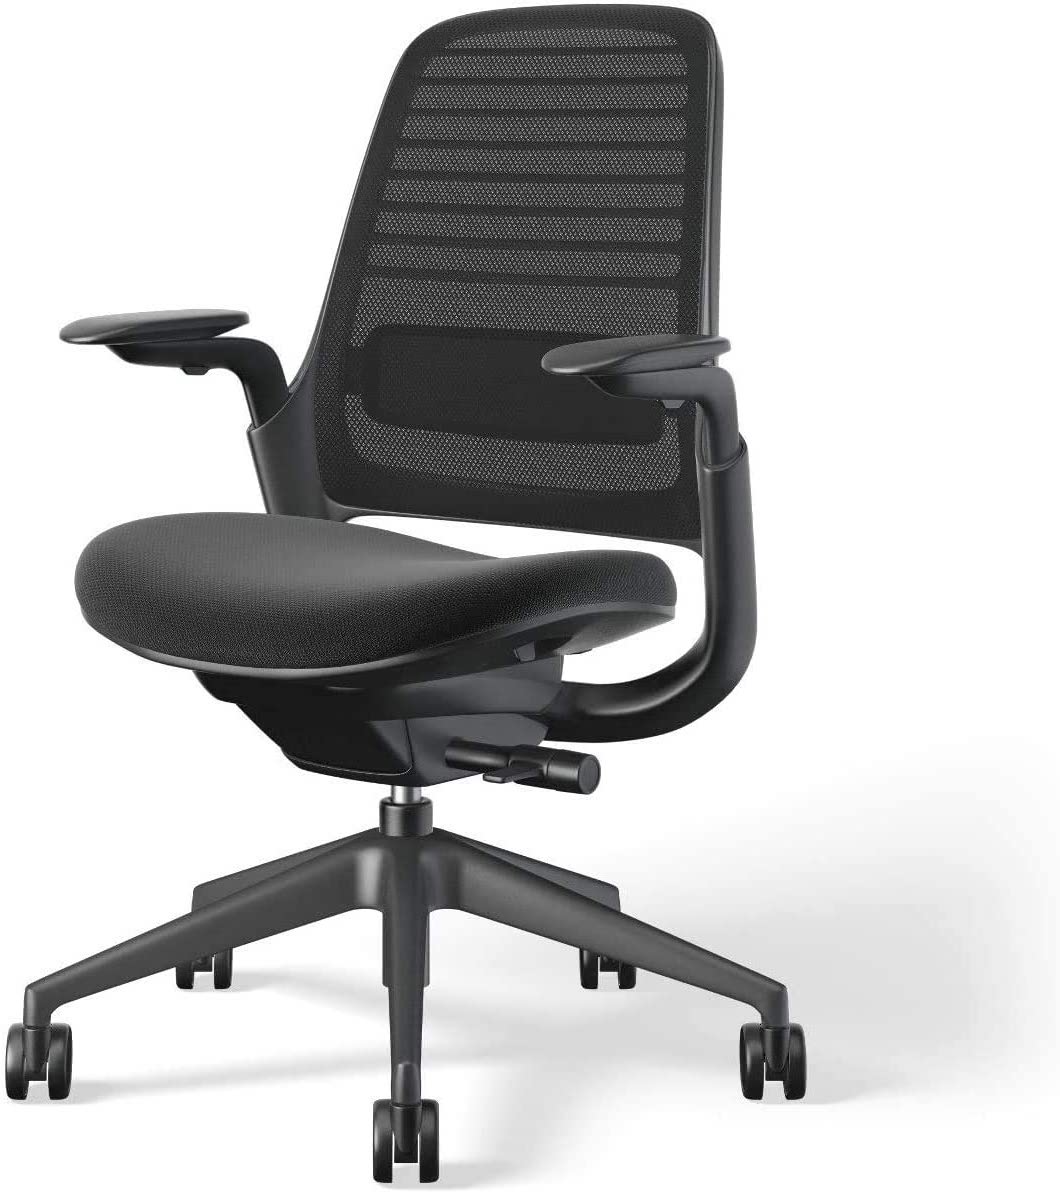 The Best Under-$500 Chair — Steelcase Series 1 Office Chair